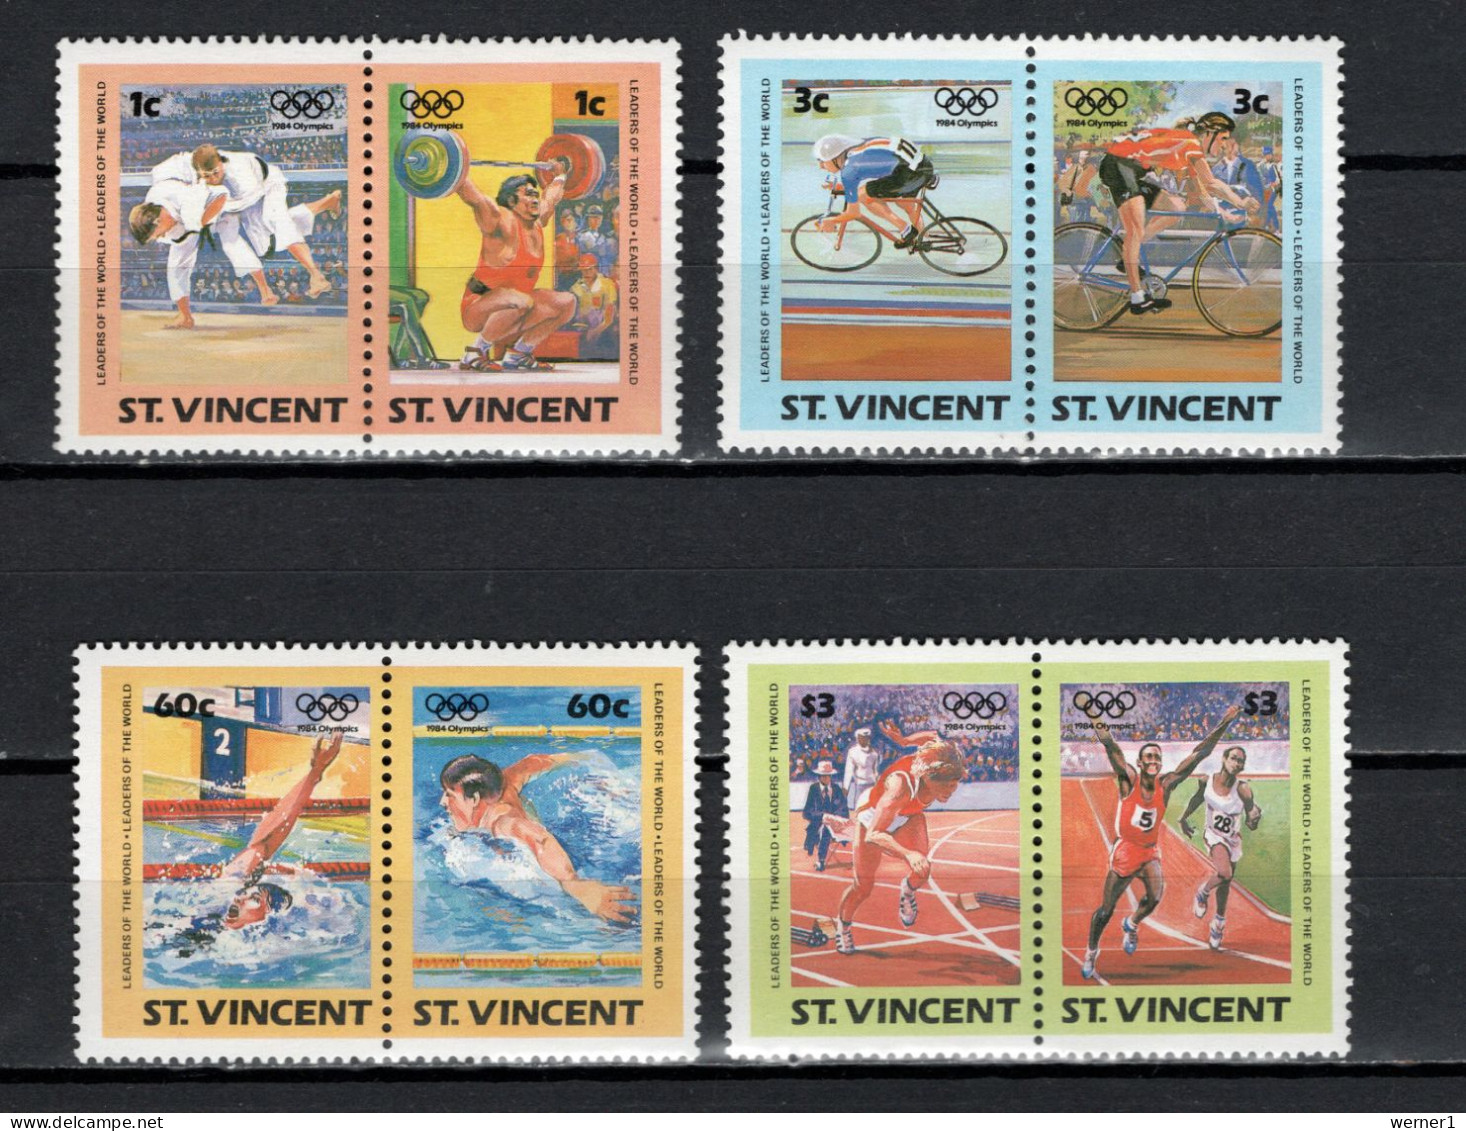 St. Vincent 1984 Olympic Games Los Angeles, Judo, Weightlifting, Cycling, Swimming, Athletics Set Of 8 MNH - Sommer 1984: Los Angeles